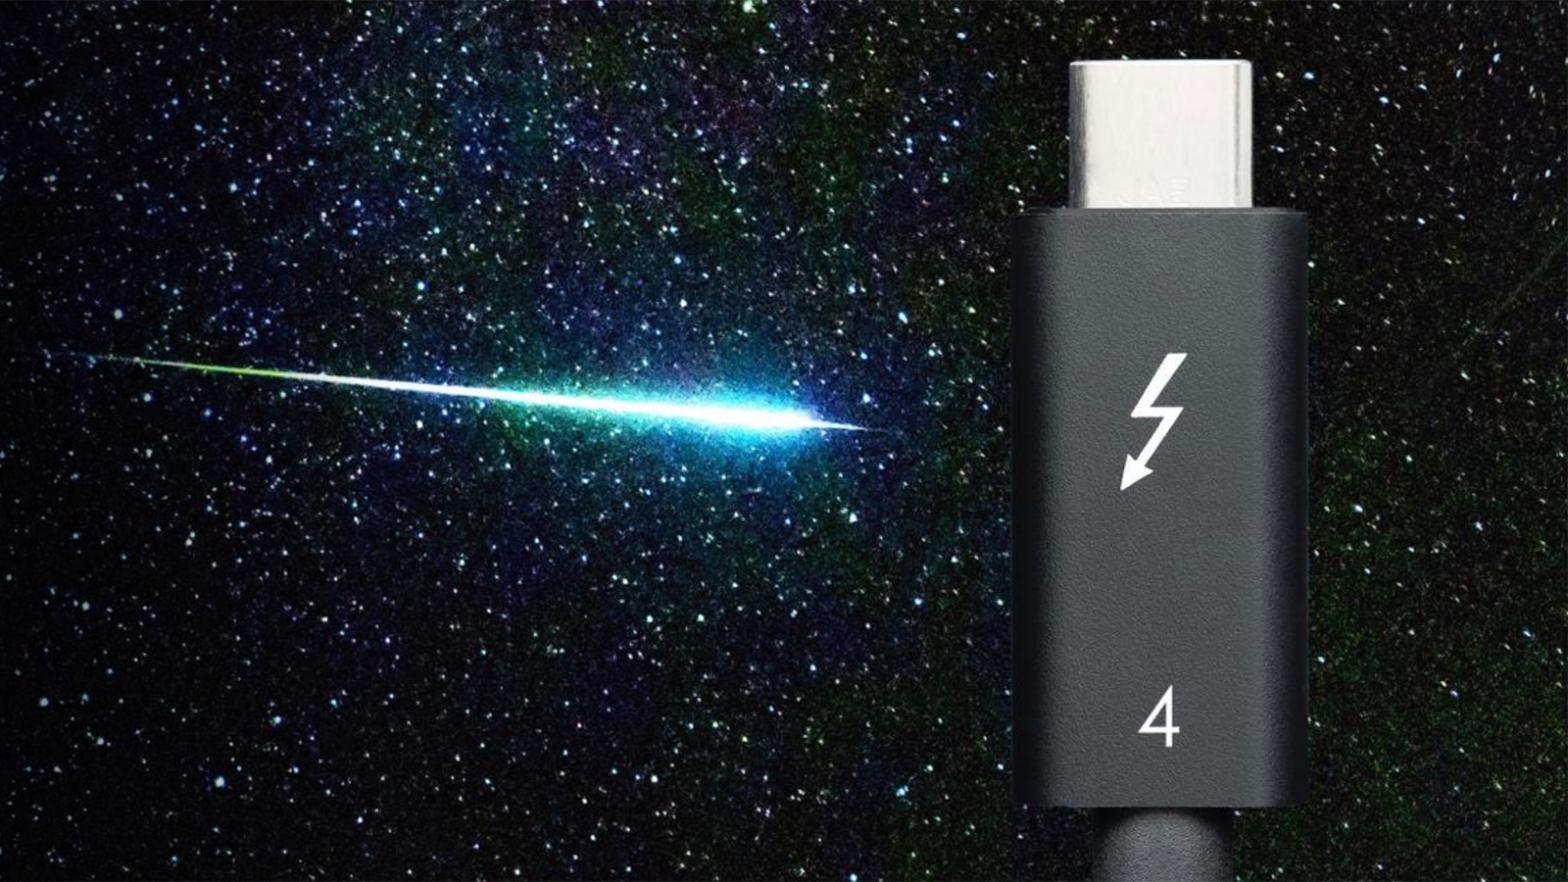 There's still confusion over how Thunderbolt 3 and USB-C fit together. (Image: Thunderbolt)